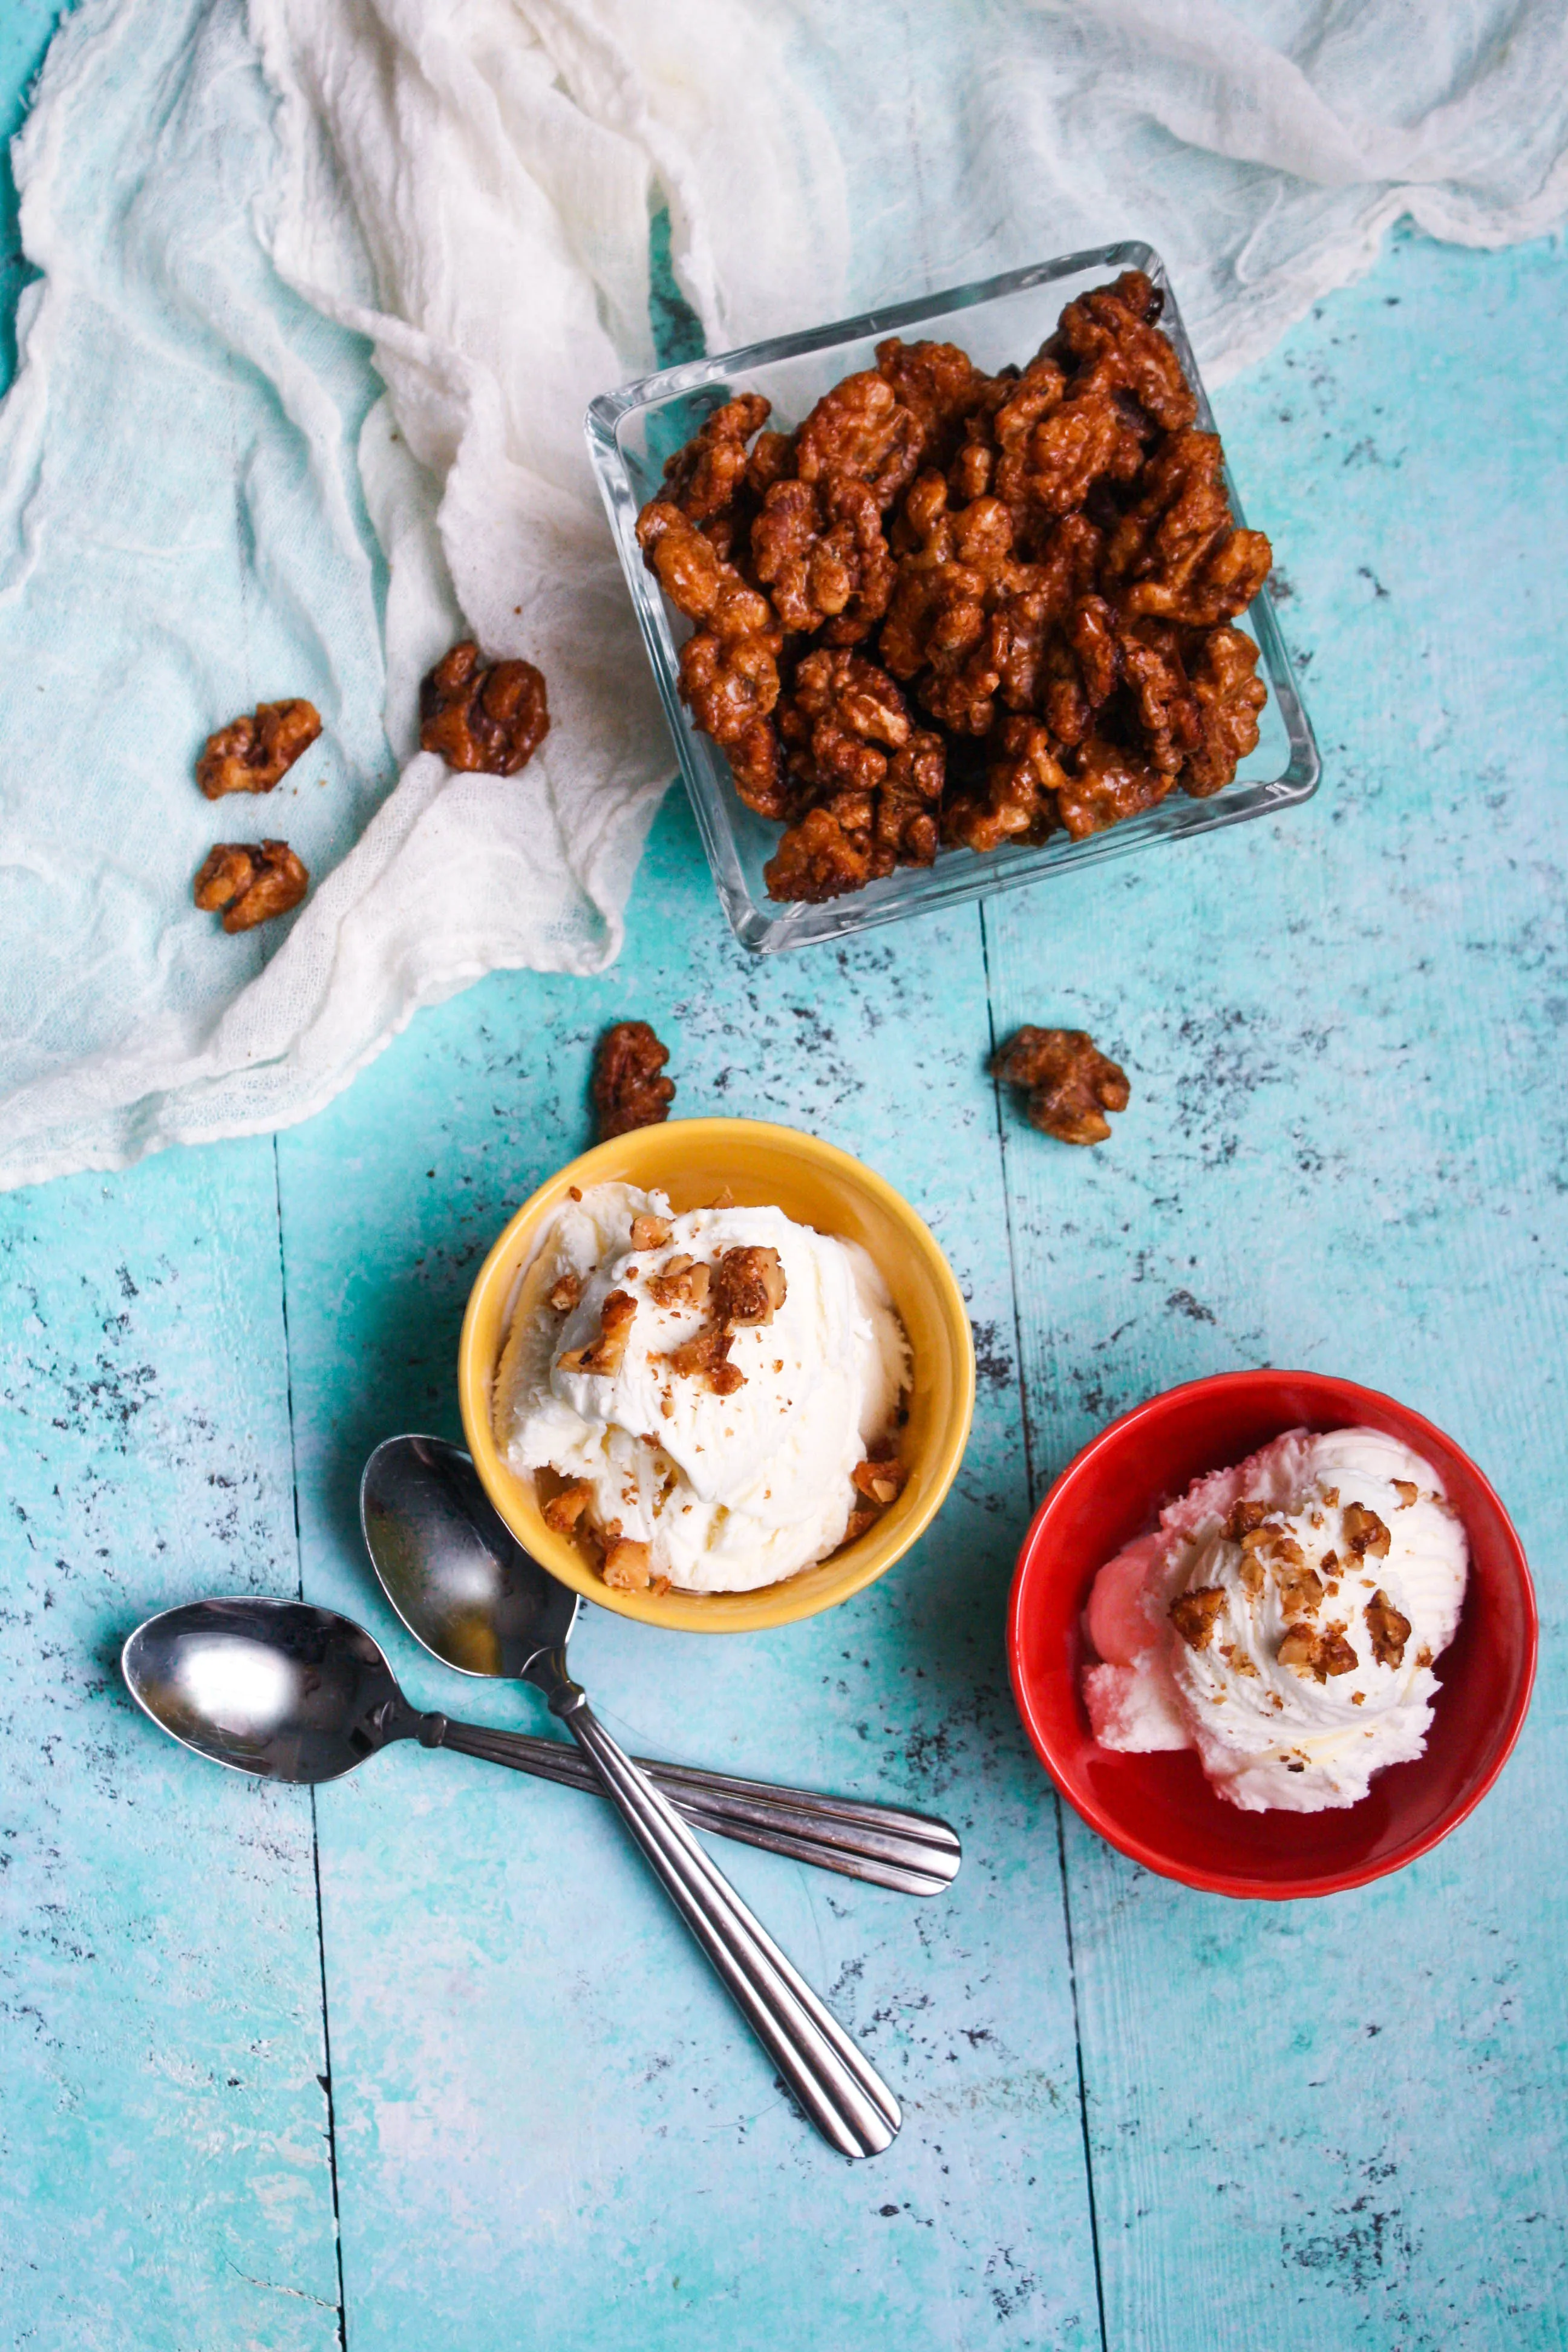 Sweet, Spicy & Smoky Candied Walnuts are a fun treat for the holiday season. These candied walnuts are so good to snack on or to serve with your favorite ice cream, too!